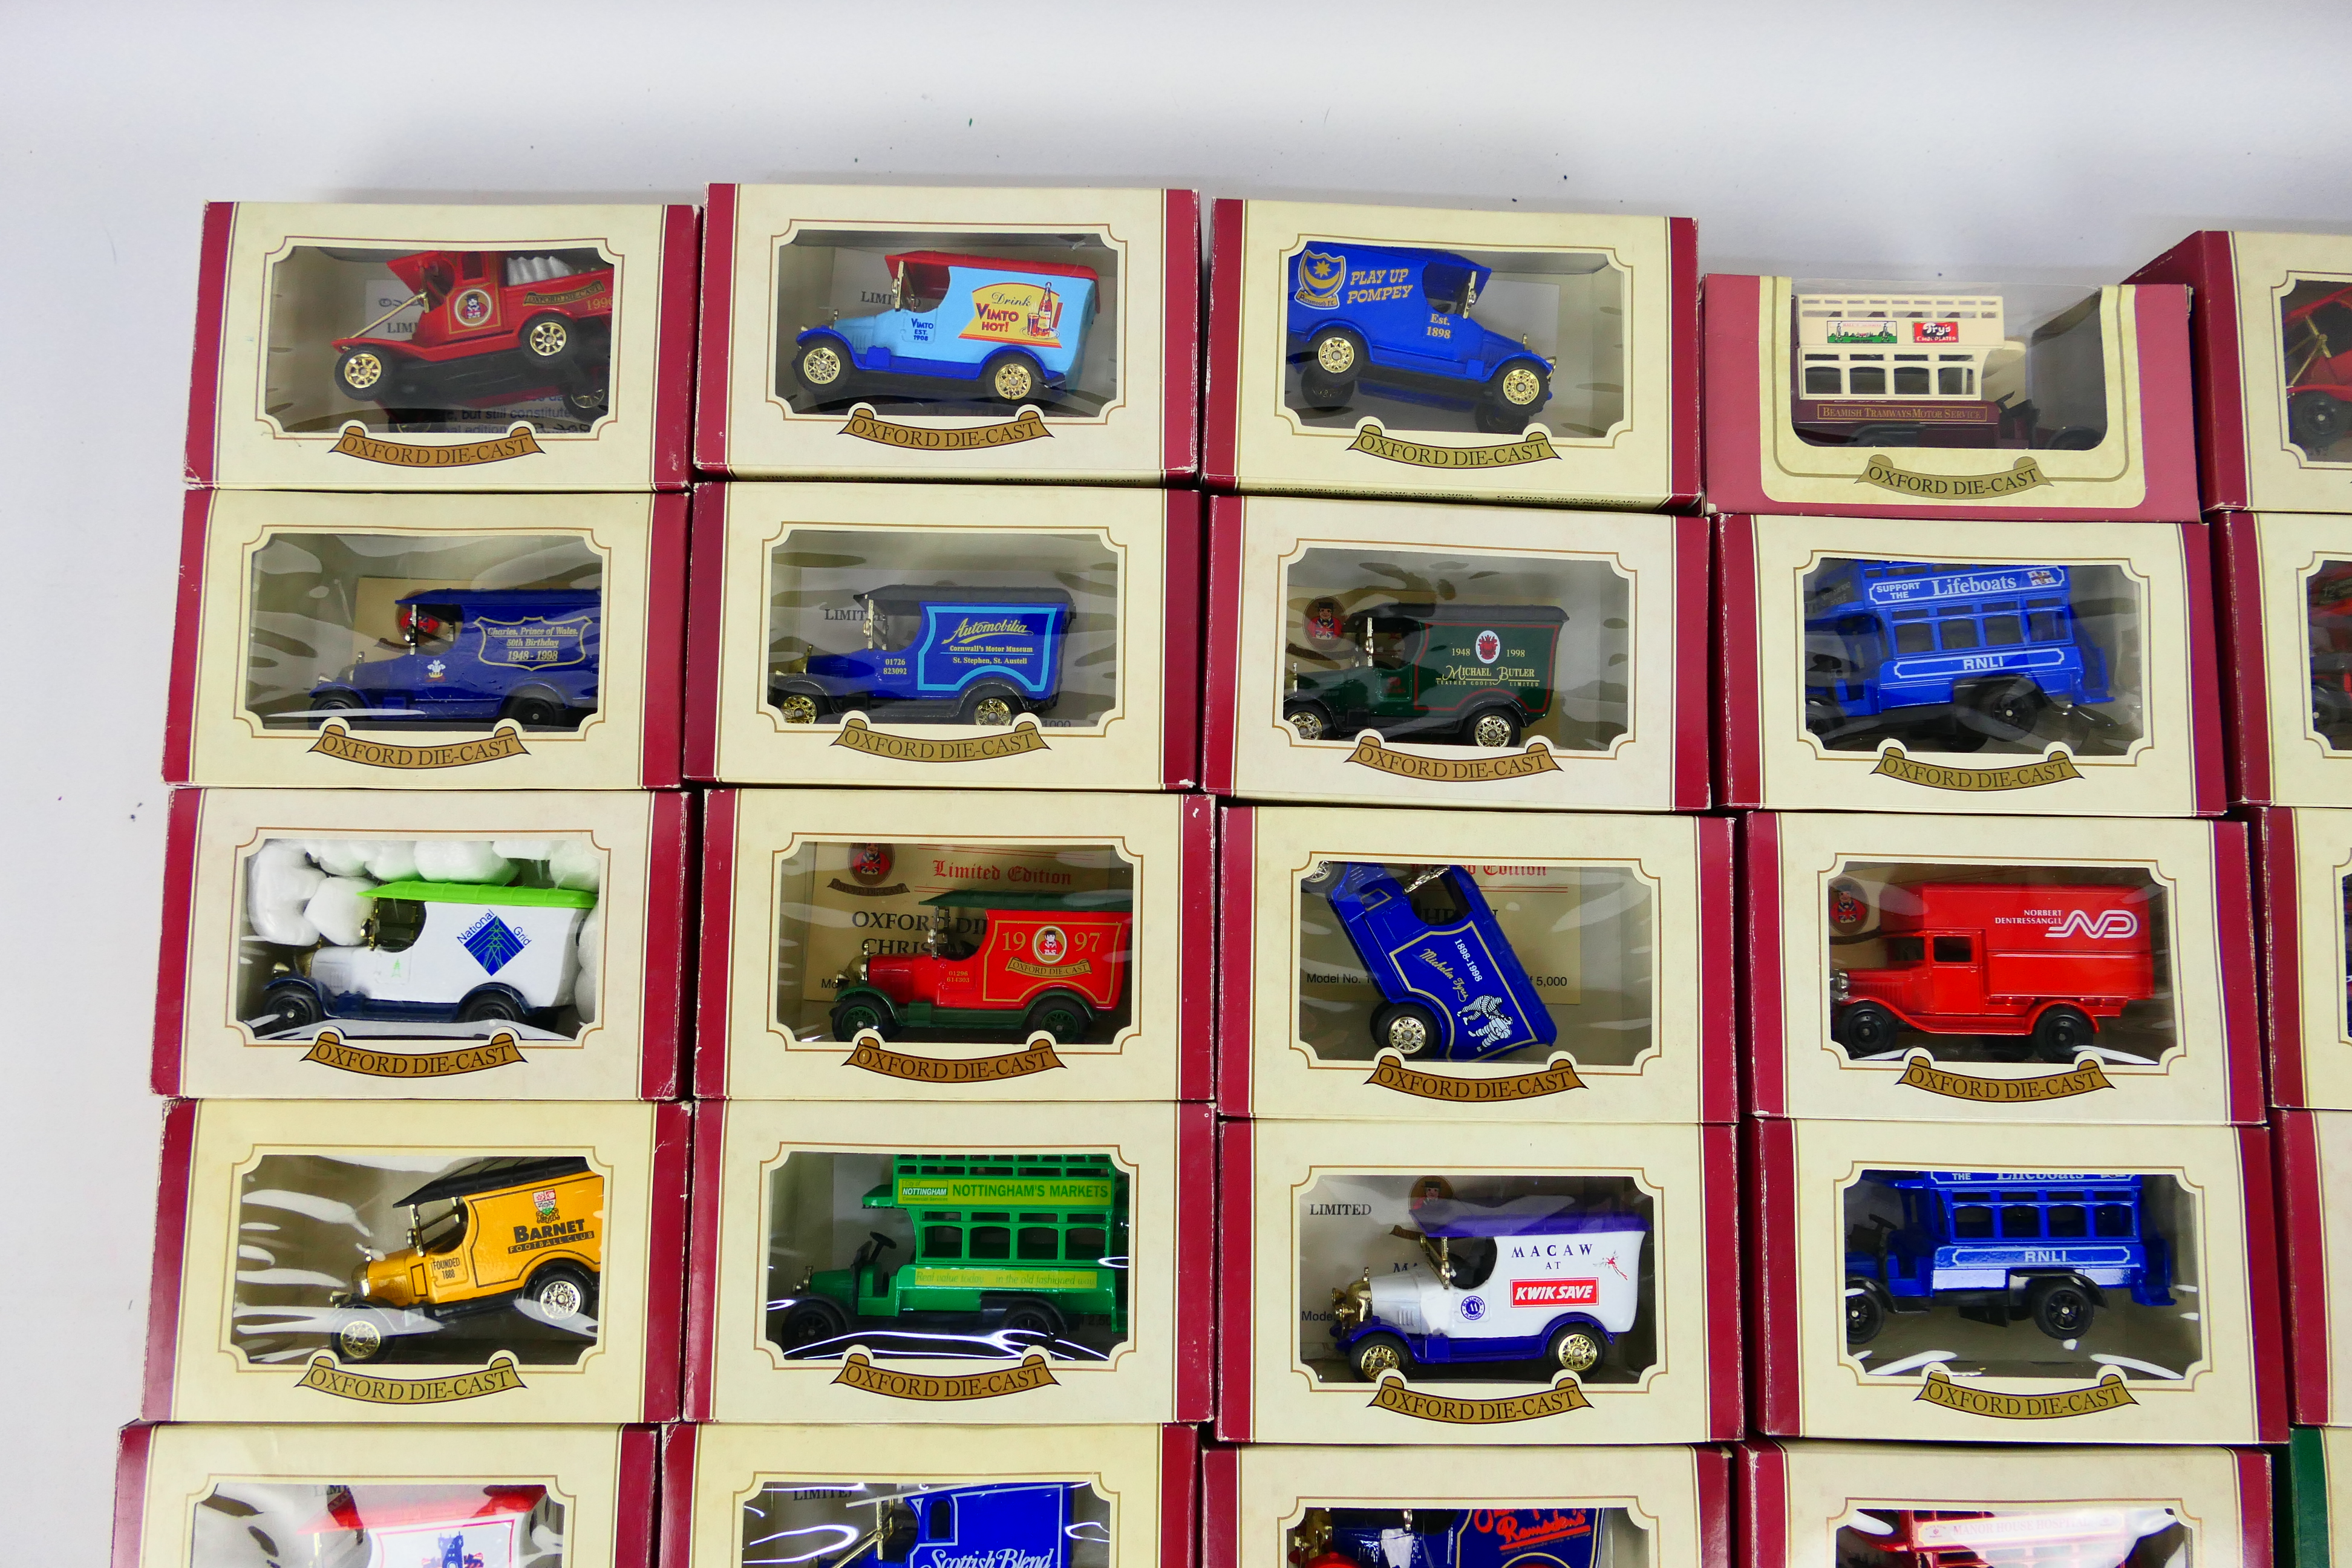 Oxford Diecast - A collection of 30 Oxford Diecast Metal vehicles including National Grid, Charles, - Image 2 of 5